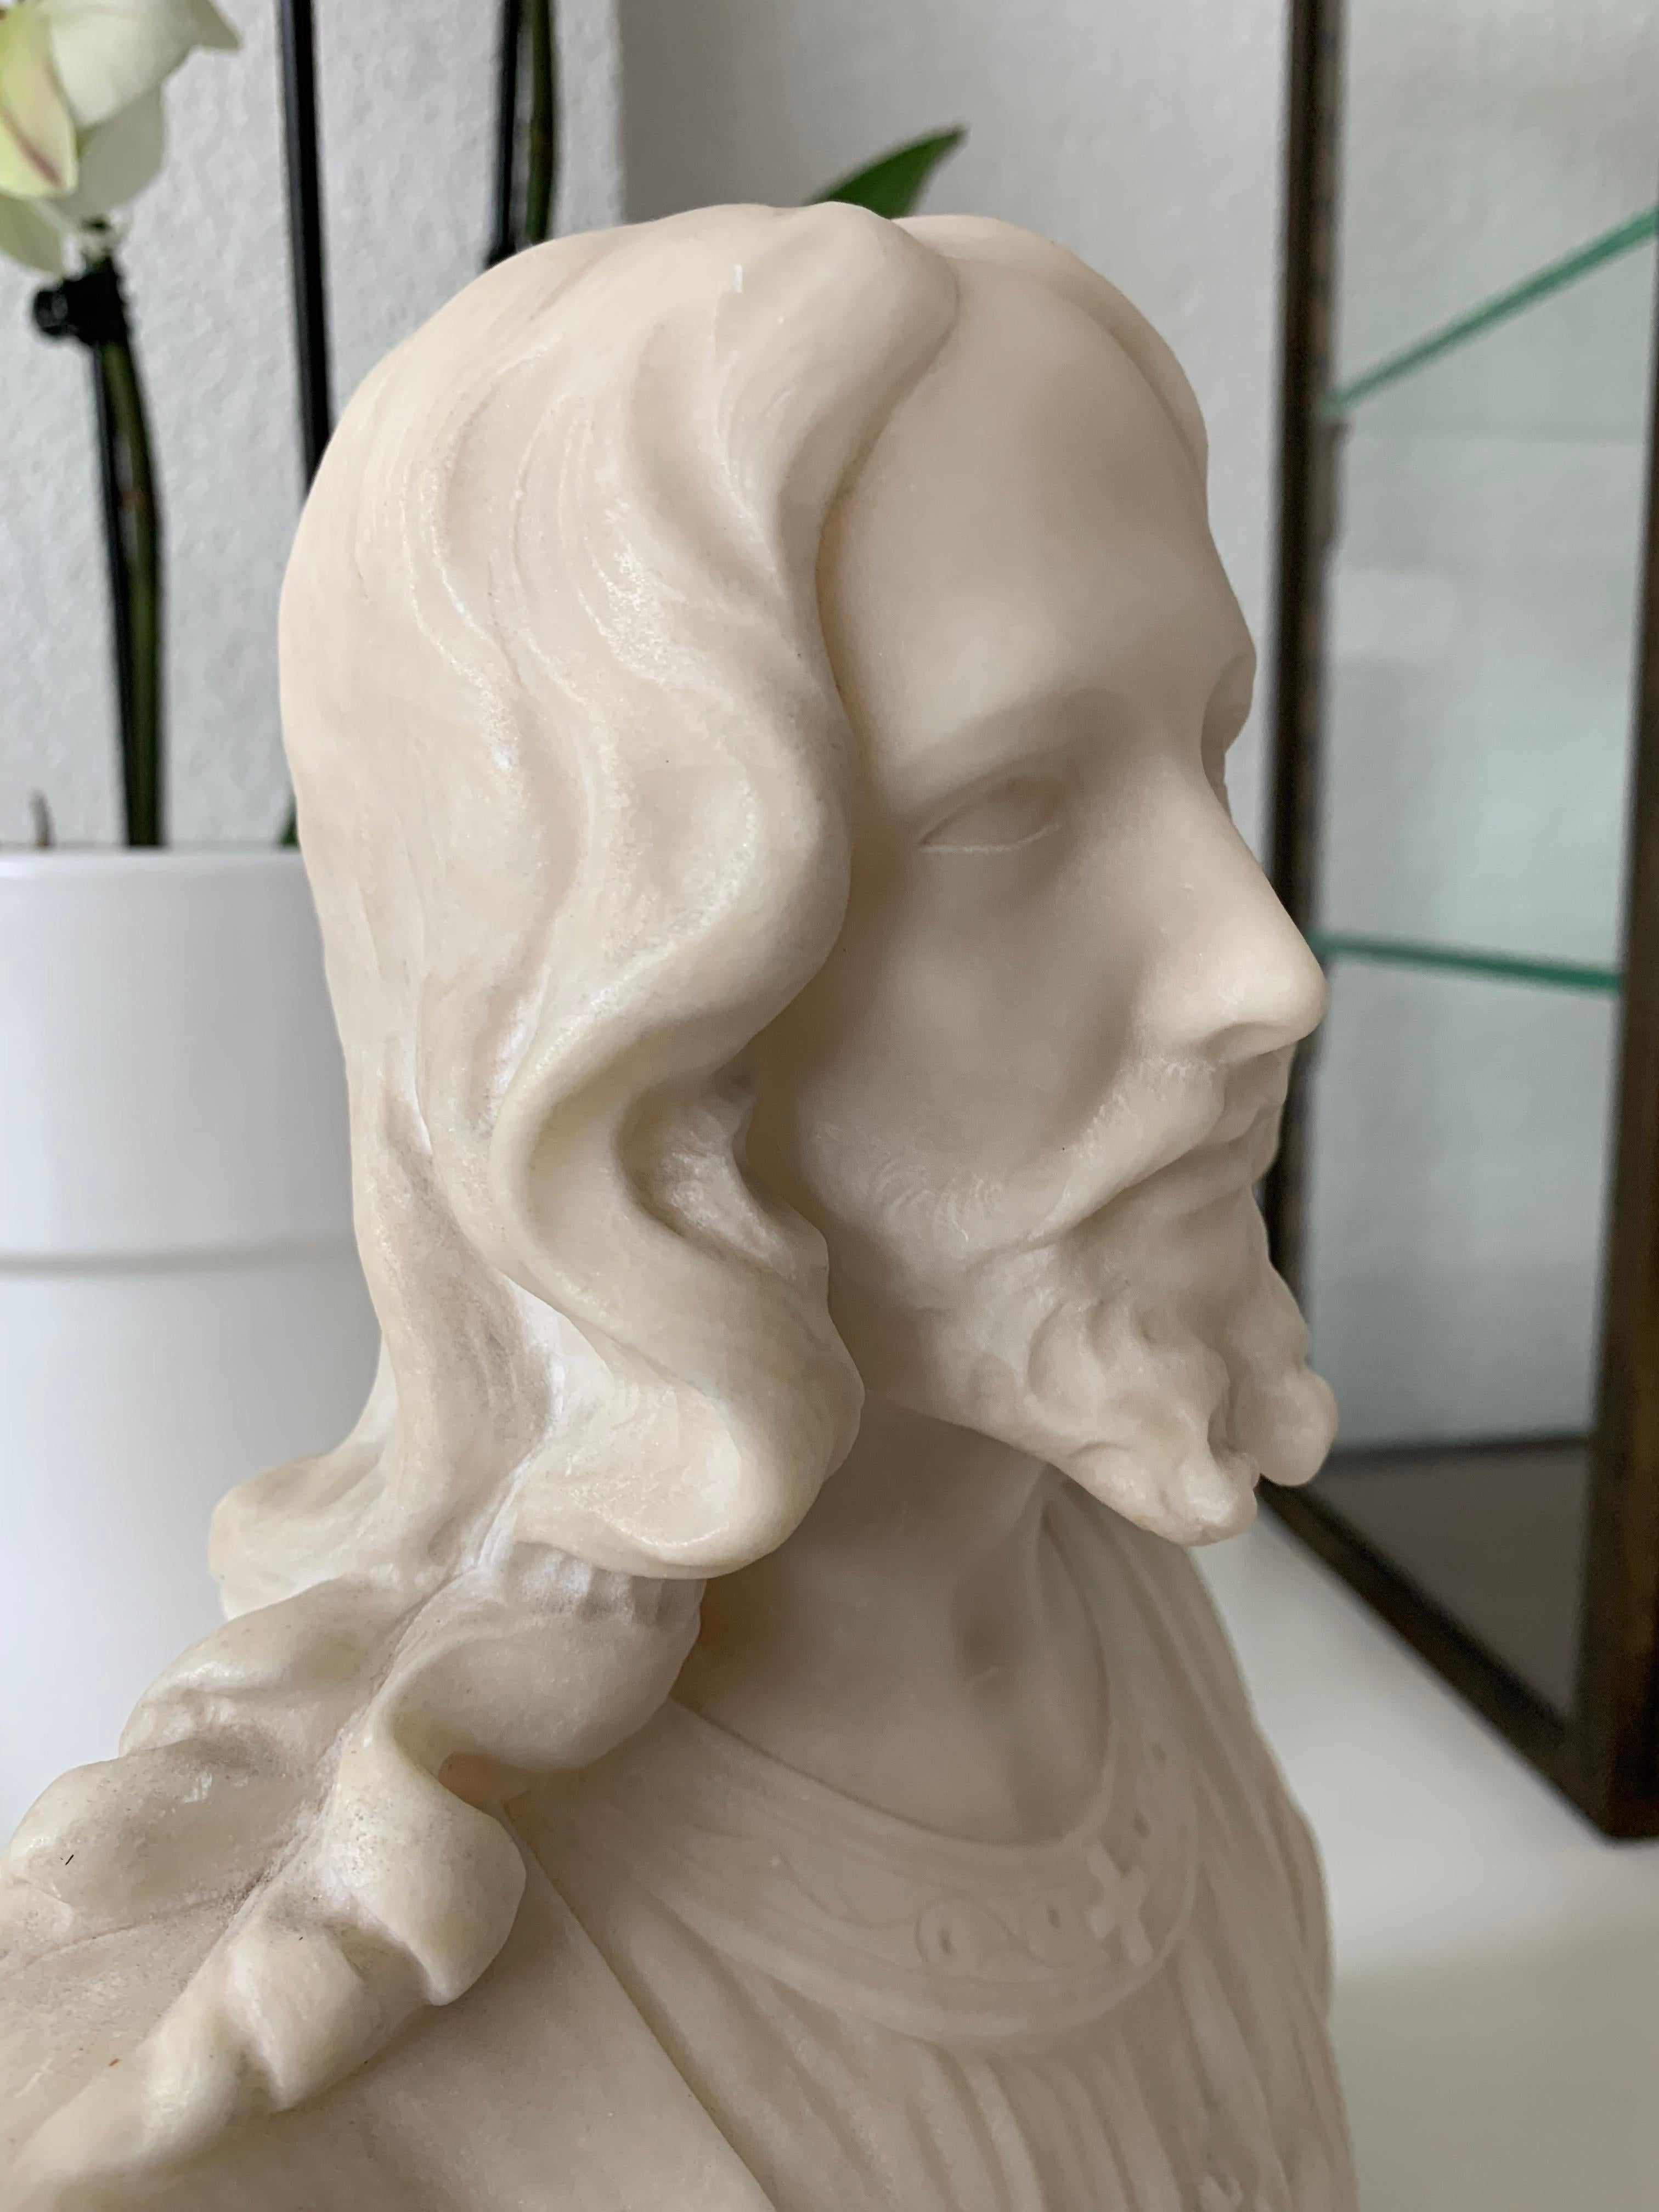 Italian Early 1900s Signed Marble Sculpture / Bust of Jesus Christ on an Art Deco Base